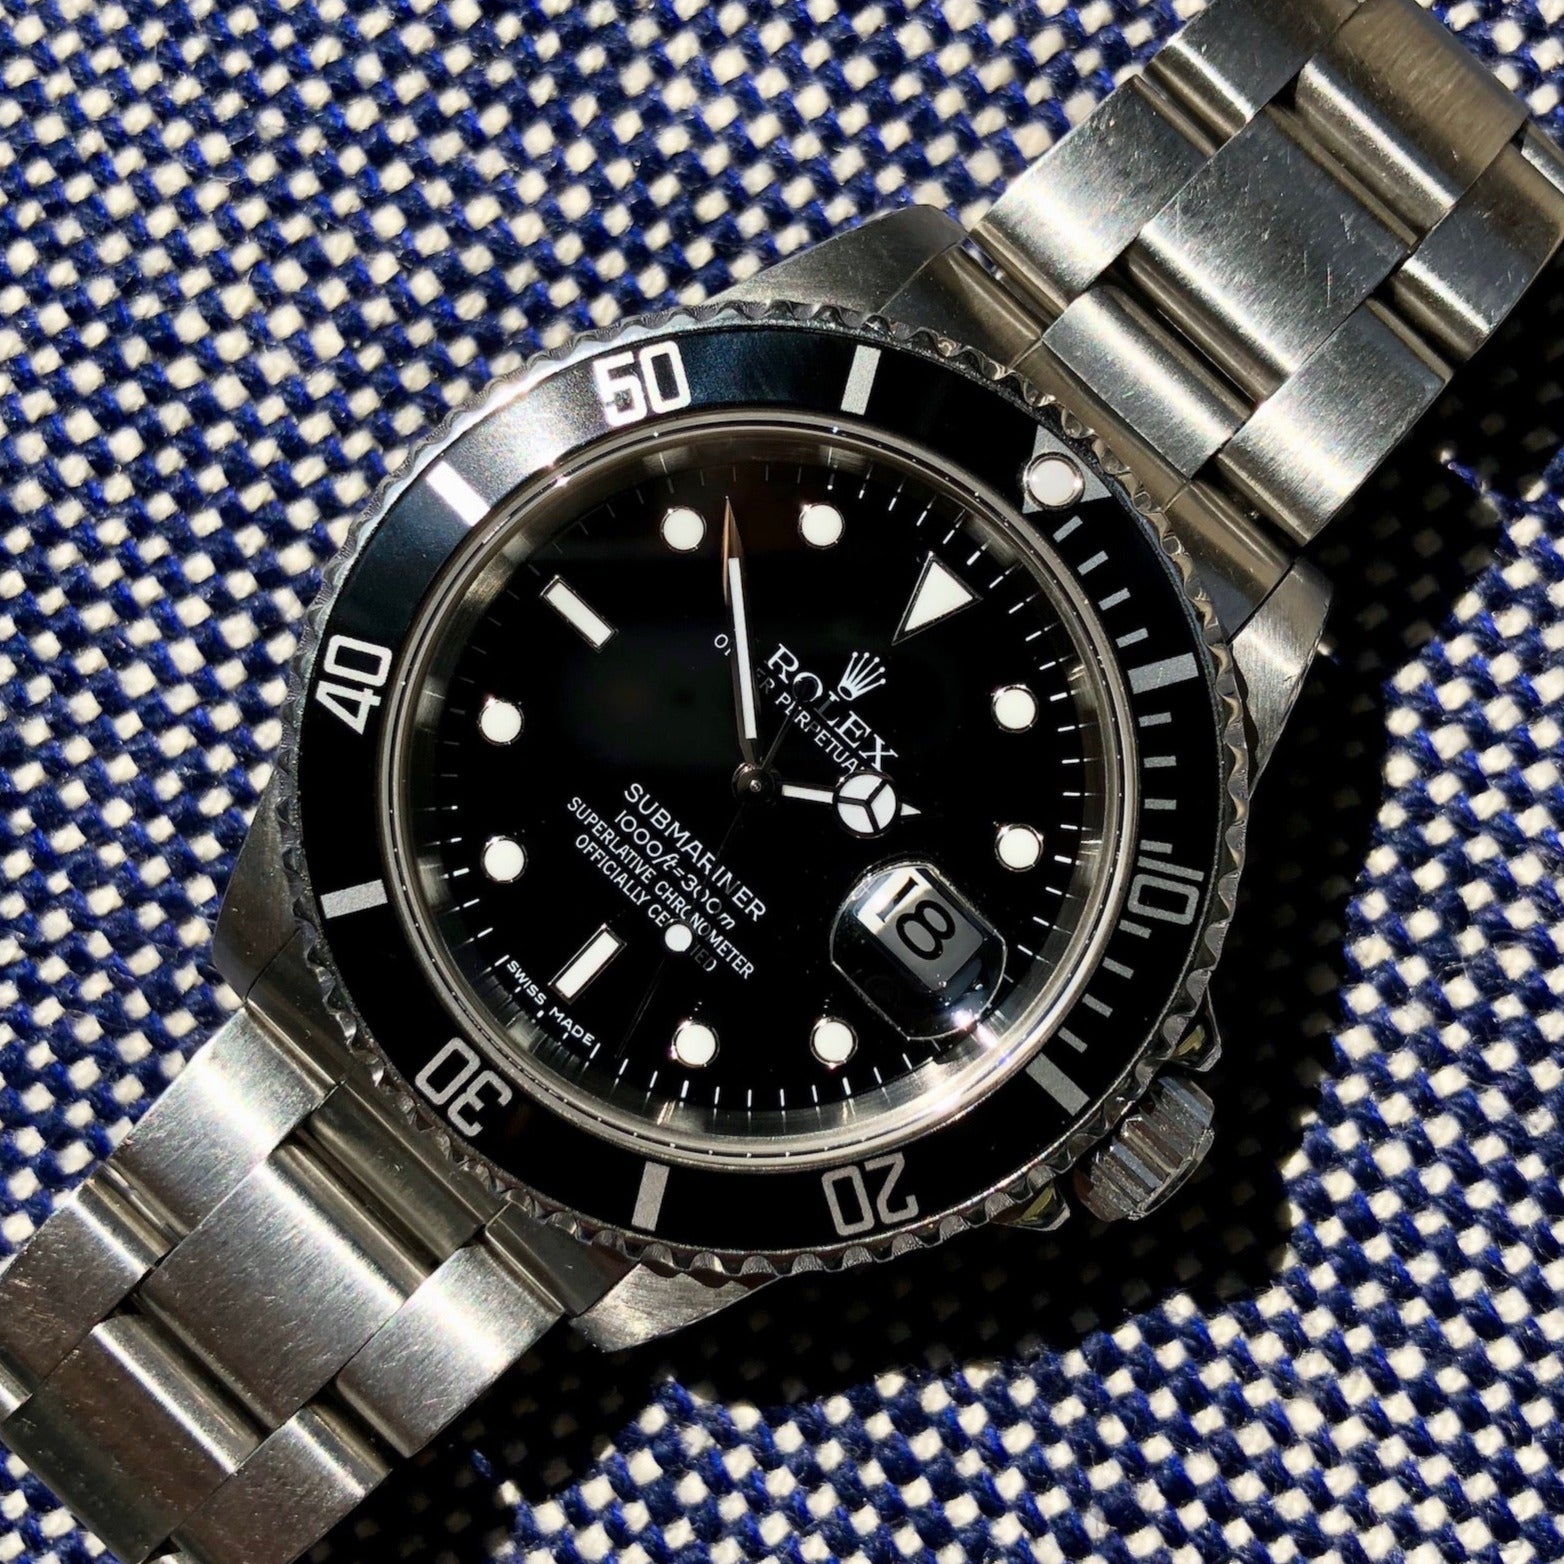 Rolex Submariner 16610 Date Steel Oyster Perpetual Automatic Caliber 3135 Circa 1989 - Hashtag Watch Company